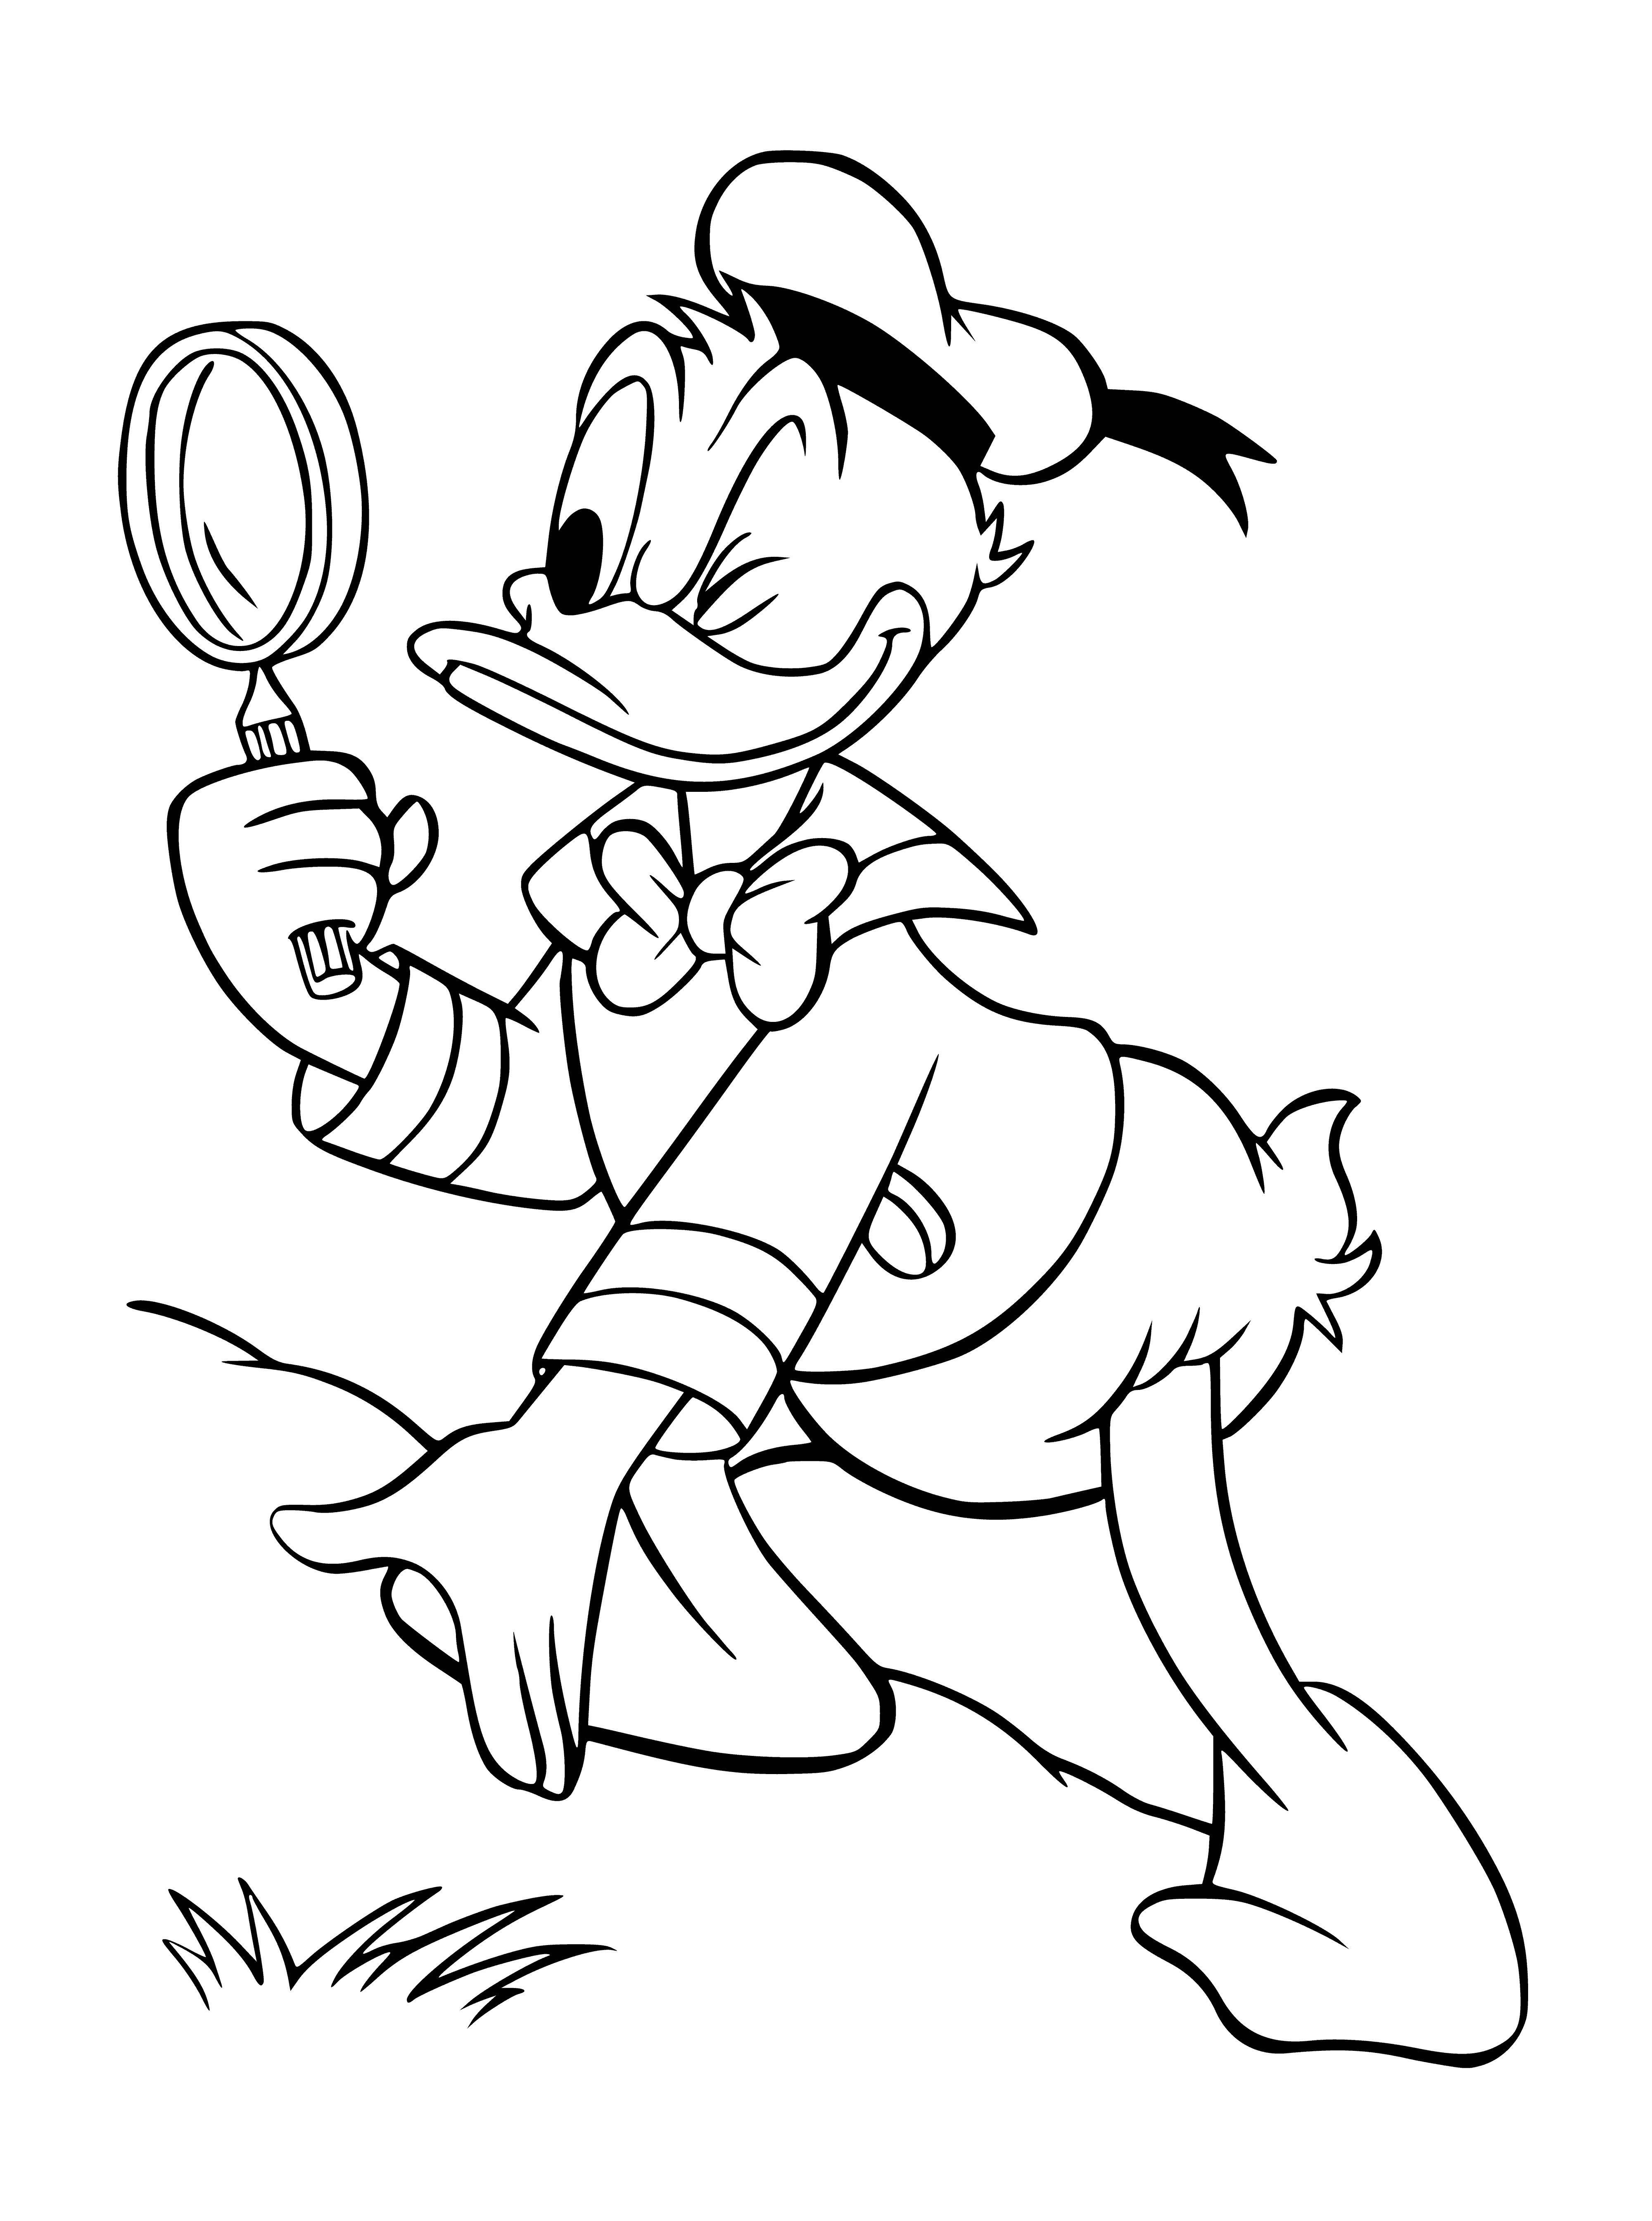 coloring page: Coloring page of "Mickey Mouse & Co - Naturalist"; mouse in green shirt & brown pants on rock, surrounded by a tree & butterfly. #coloringpage